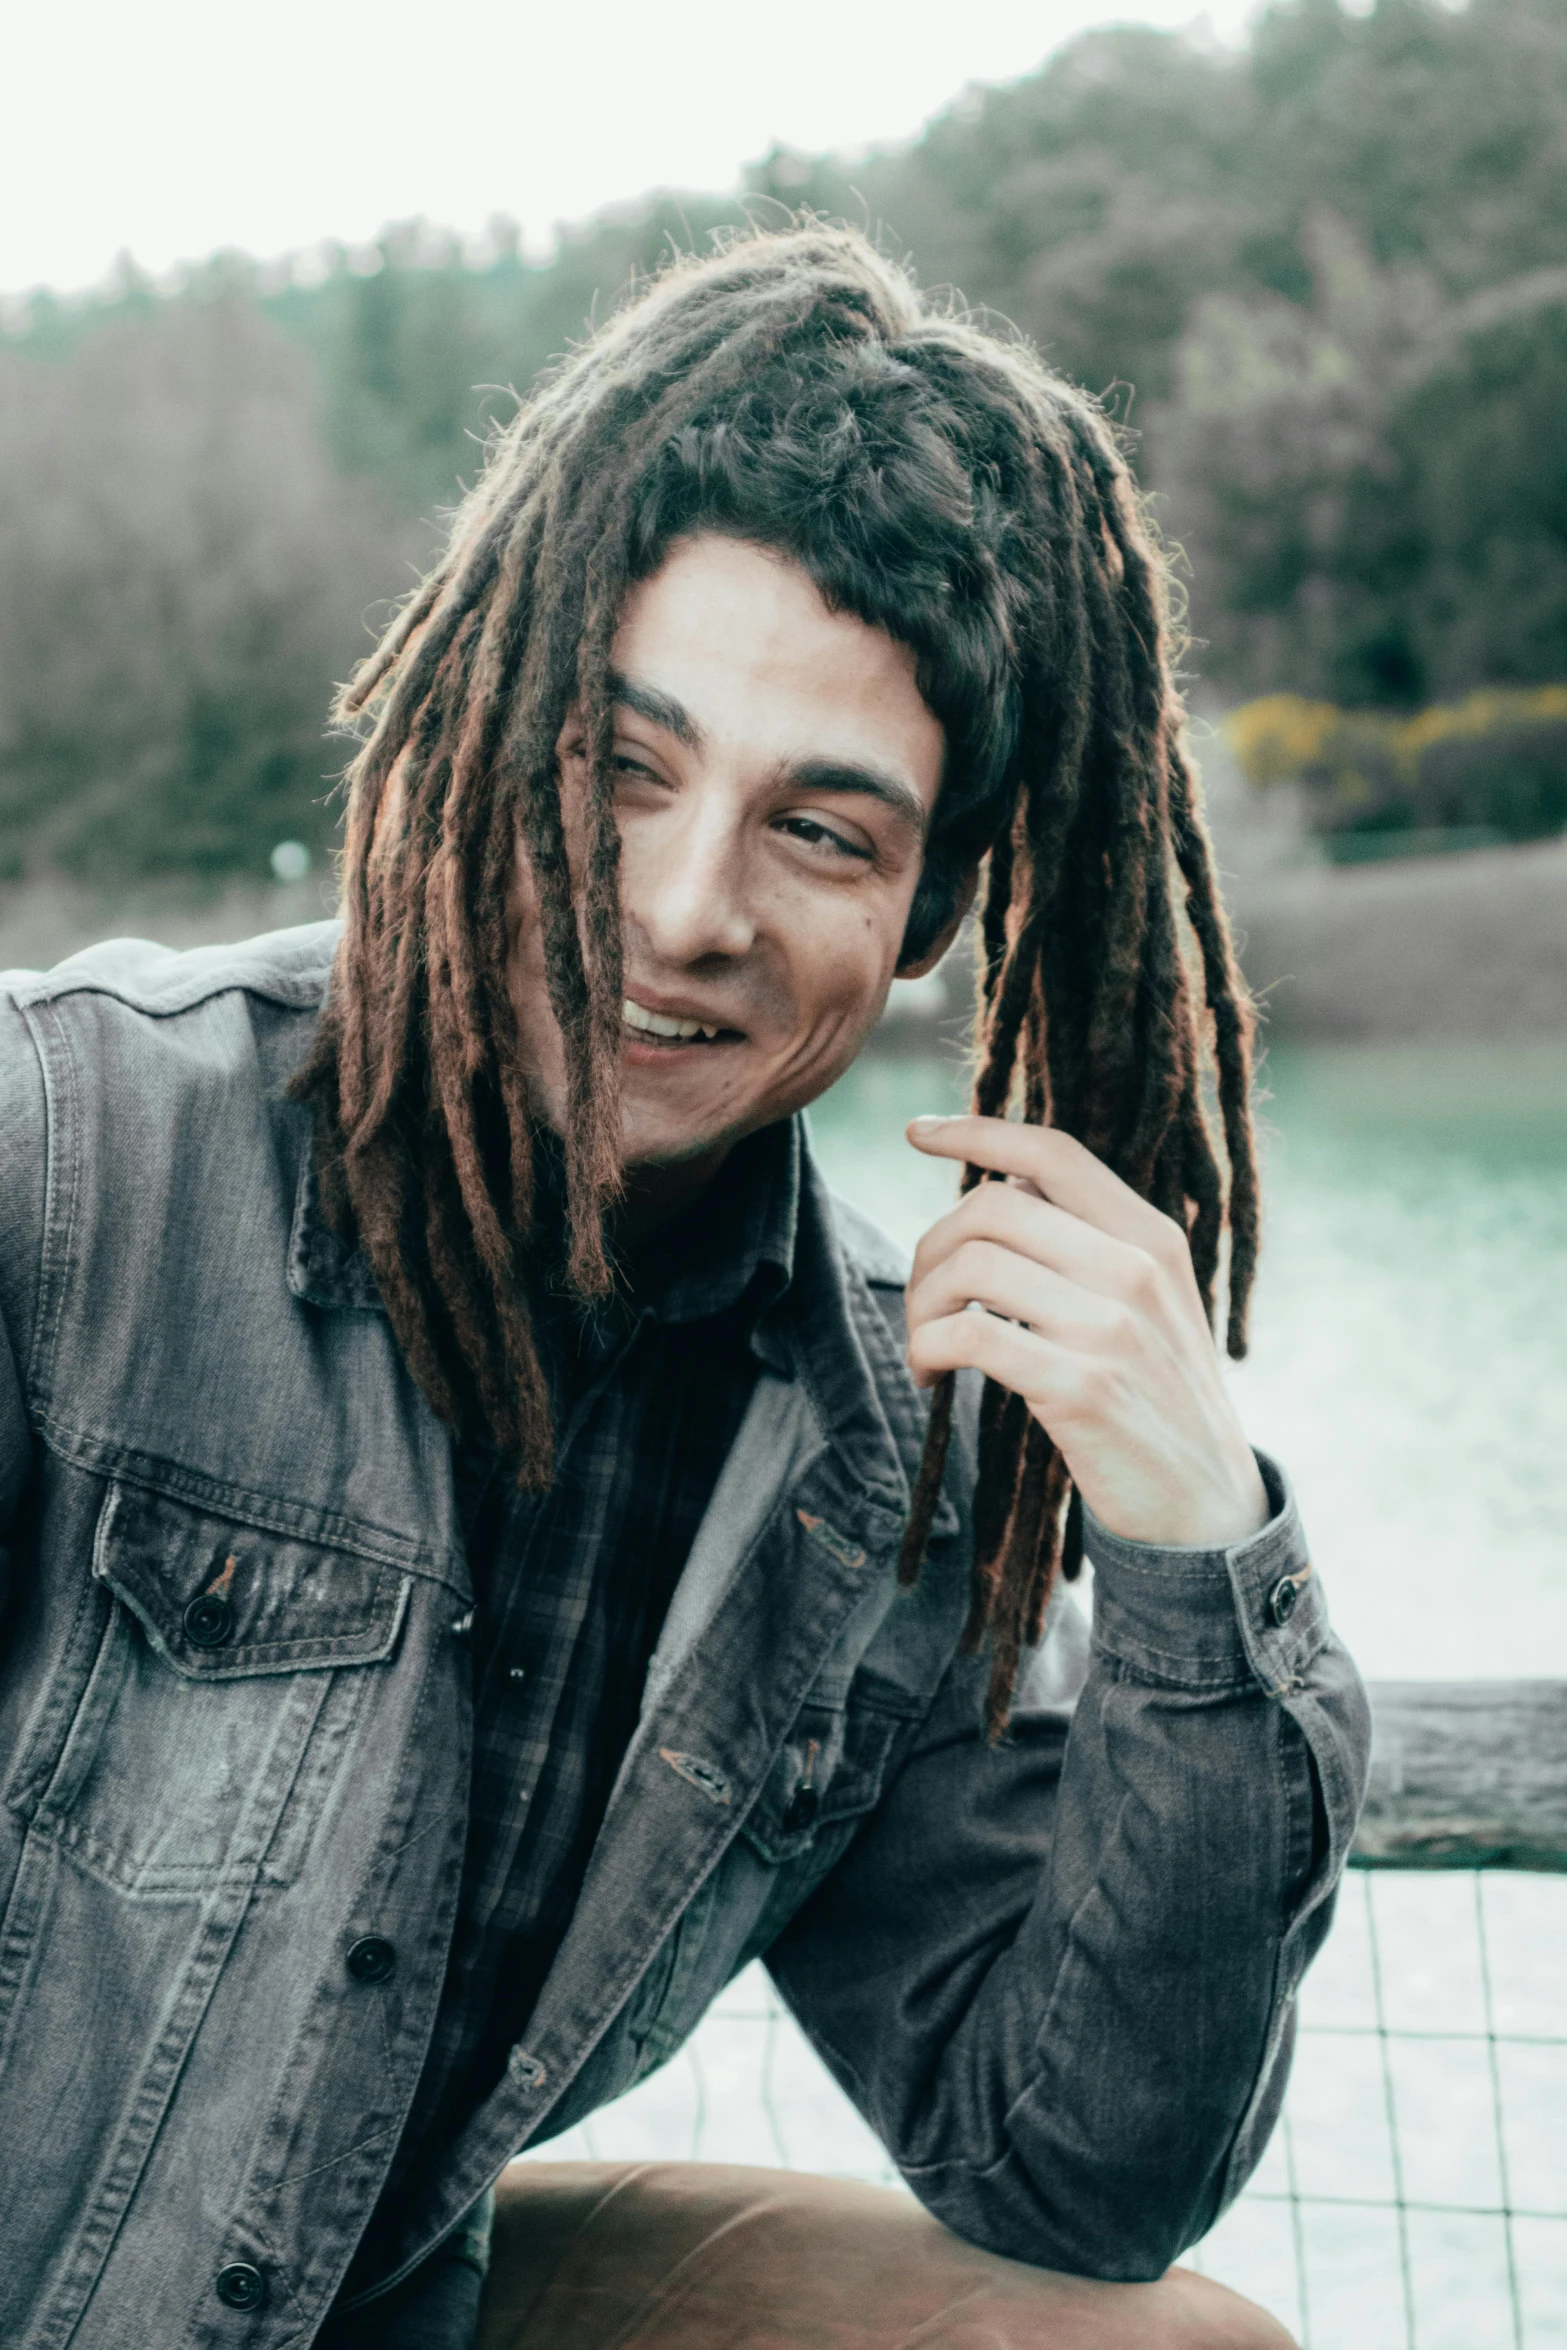 a person with dreadlocks posing near the water